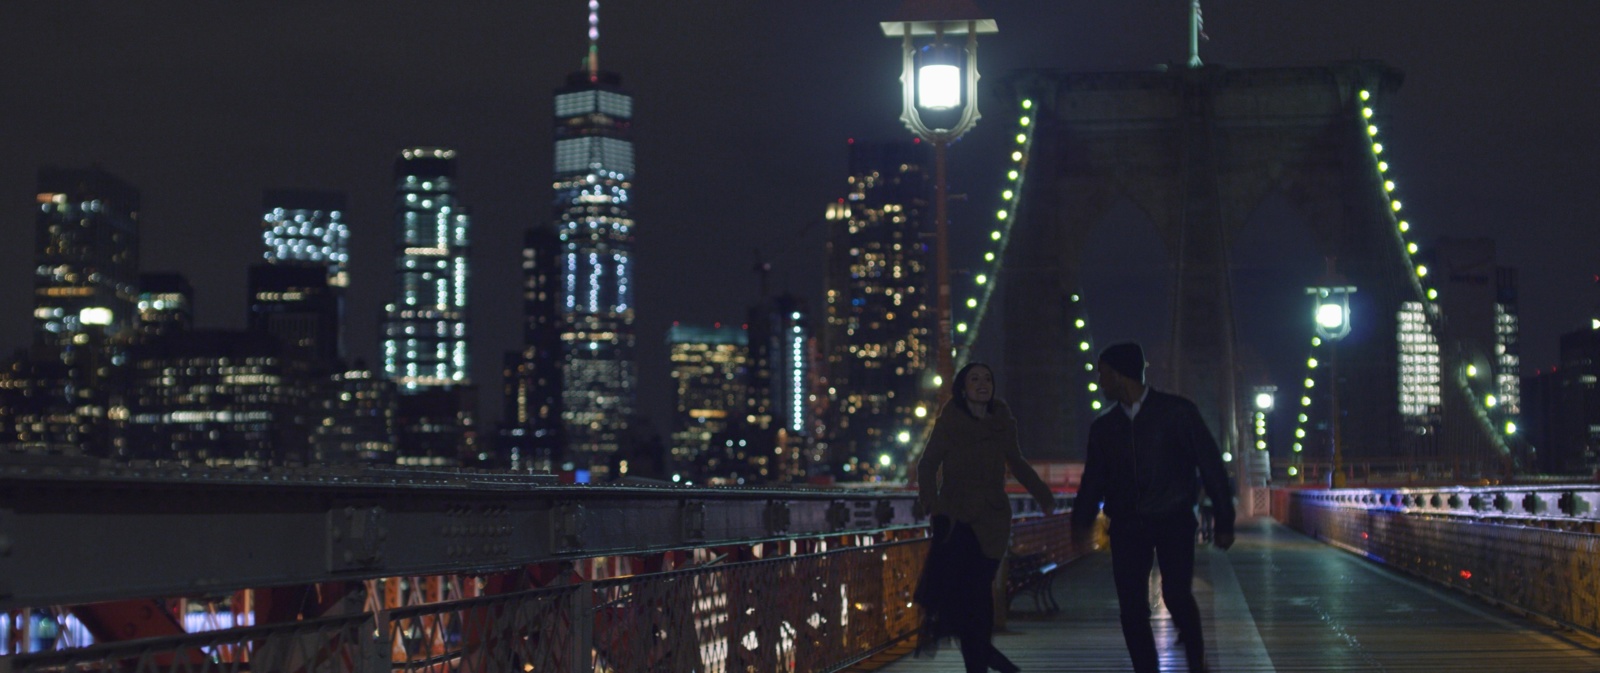 Man and woman walking on a bridge at night by a city